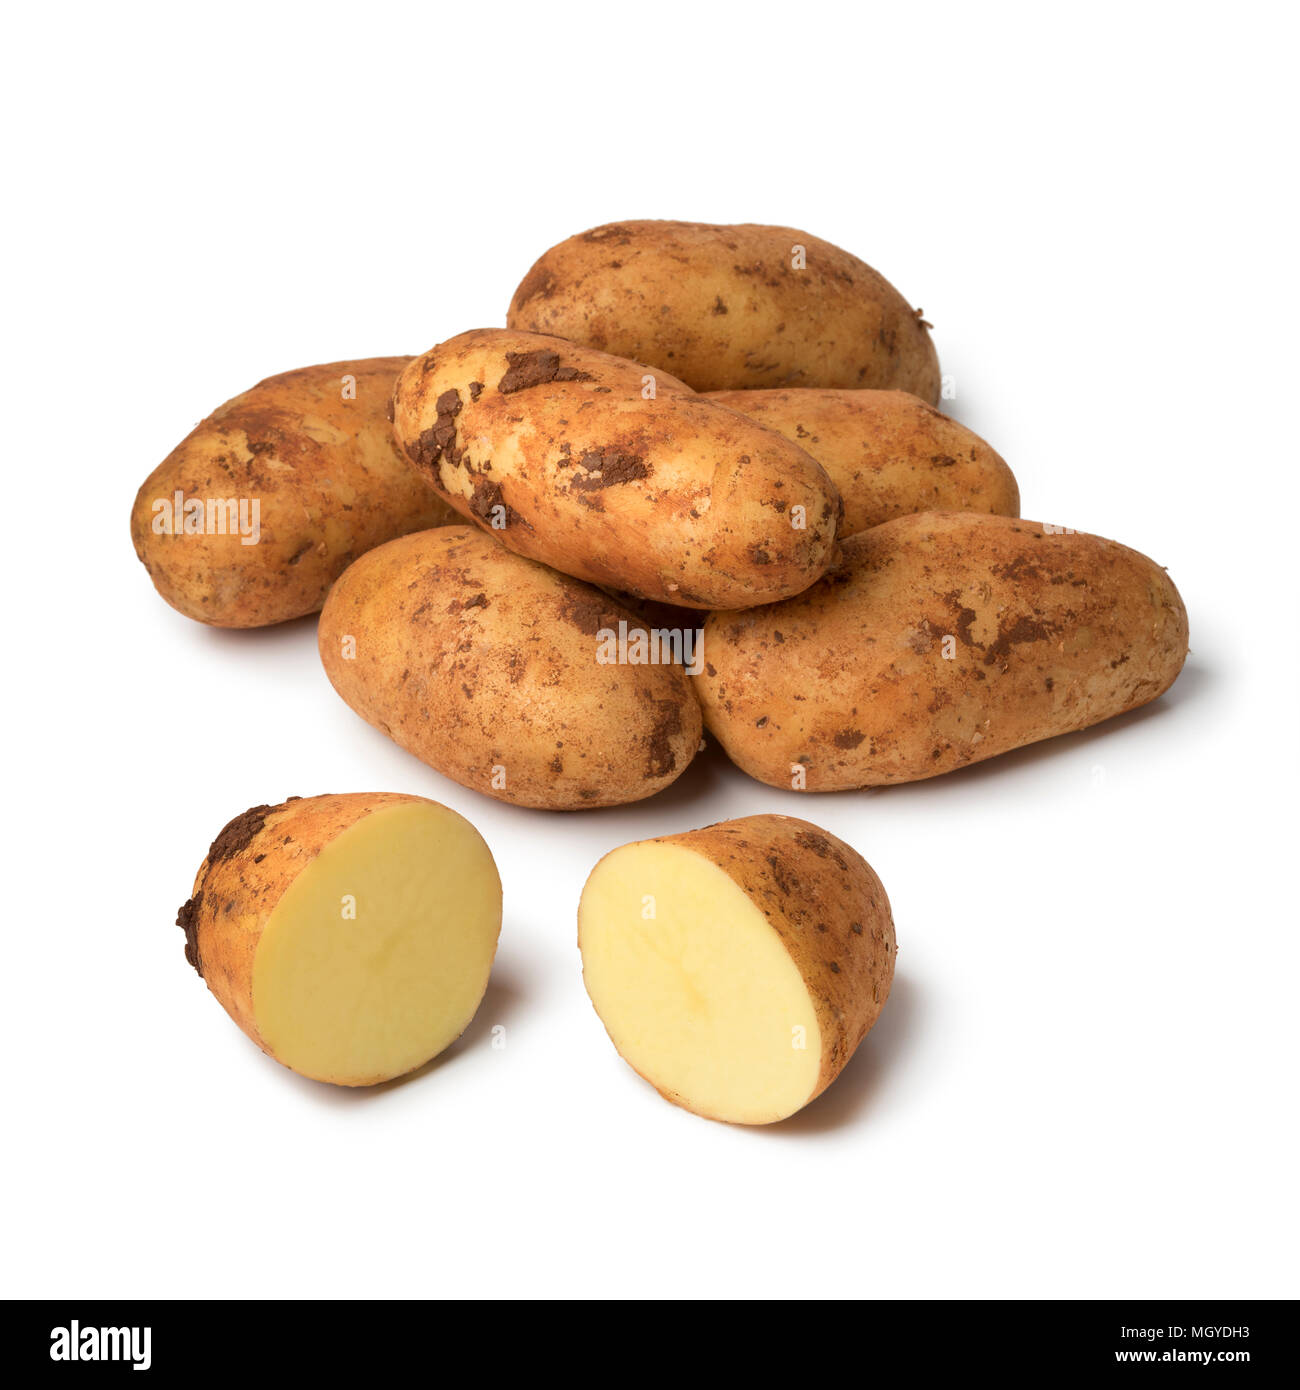 Fresh picked raw whole and sliced Diamant potatoes from Cyprus isolated on white background Stock Photo